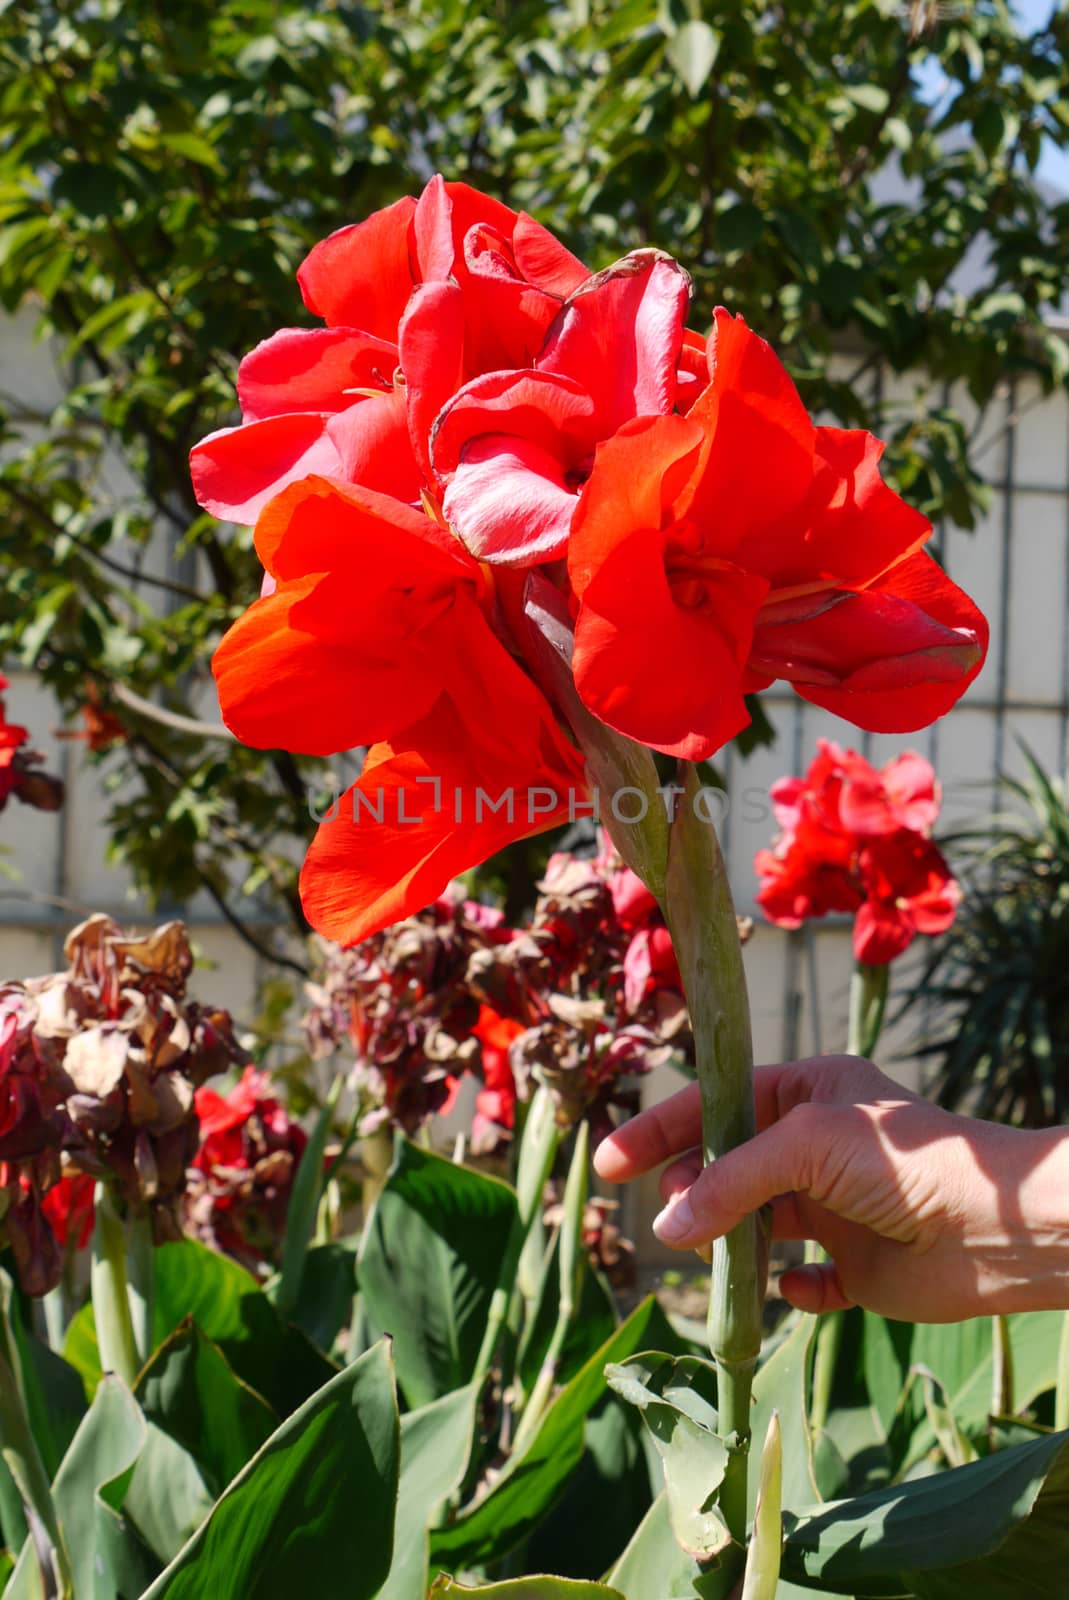 A huge beautiful flower with a thick stalk and wide red petals. You have to hold your hand because it bends under your weight.